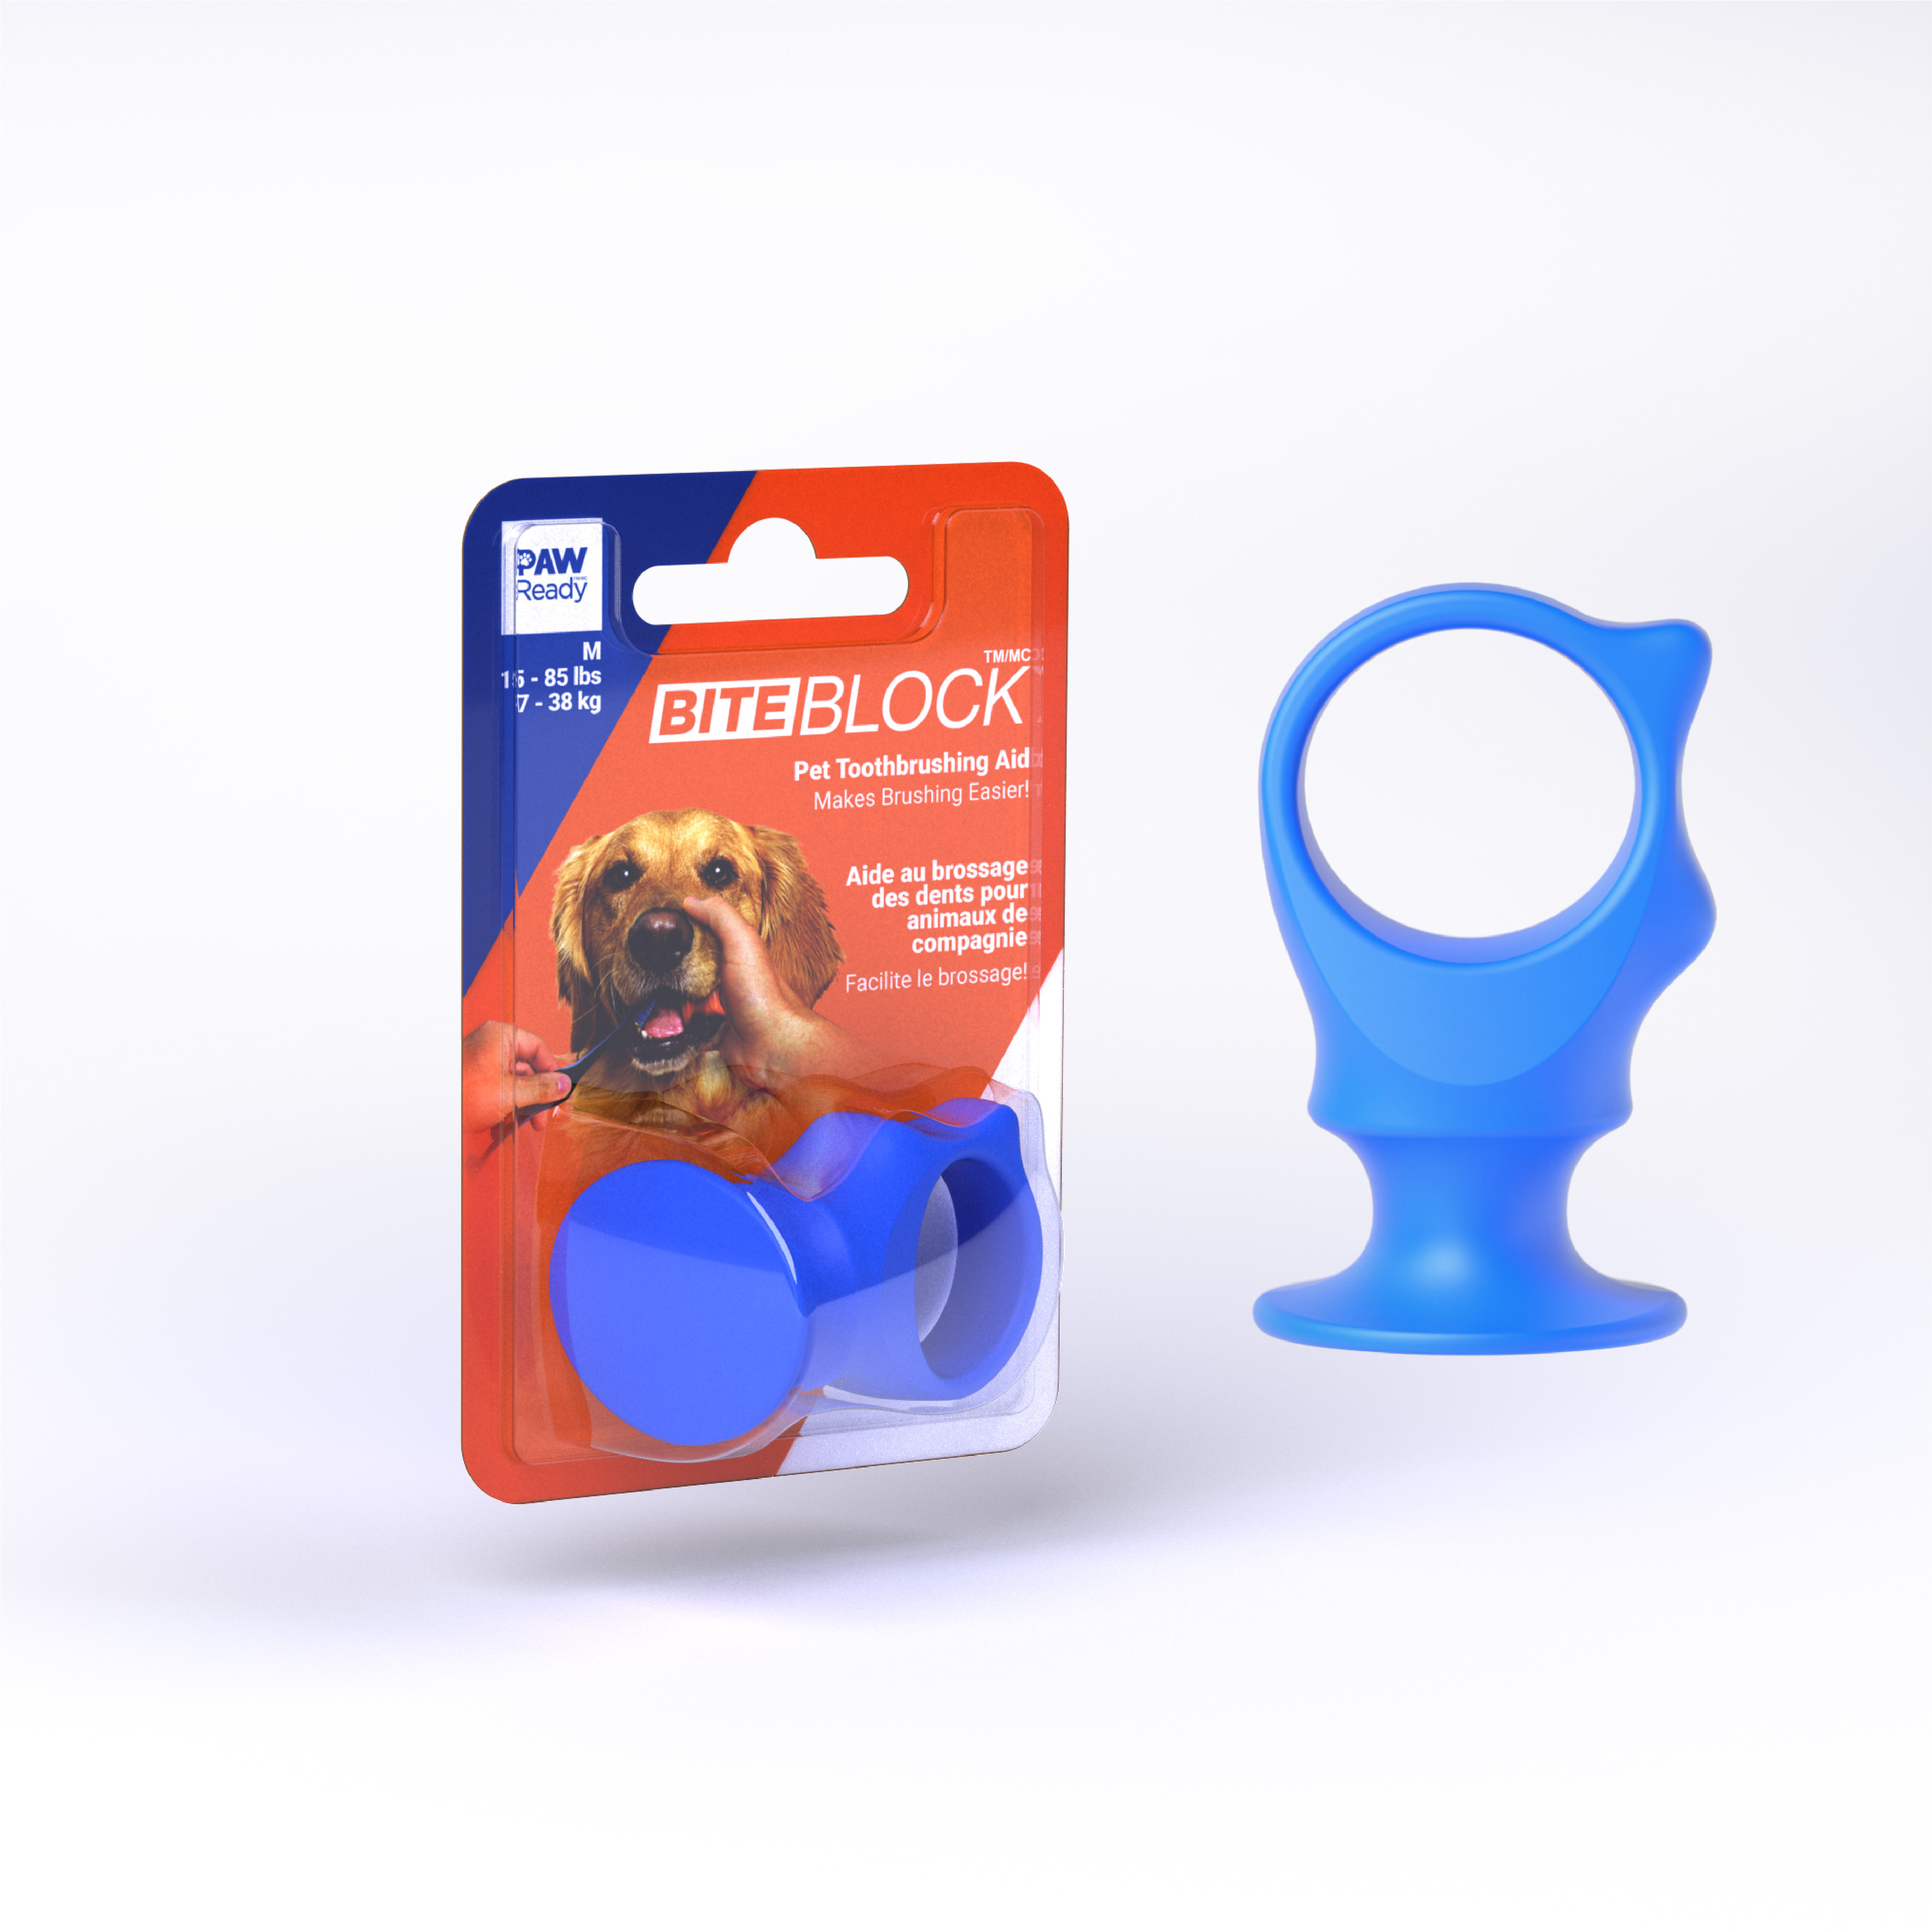 Bite Block Pet Toothbrushing Aid for Puppies, Dogs and Cats